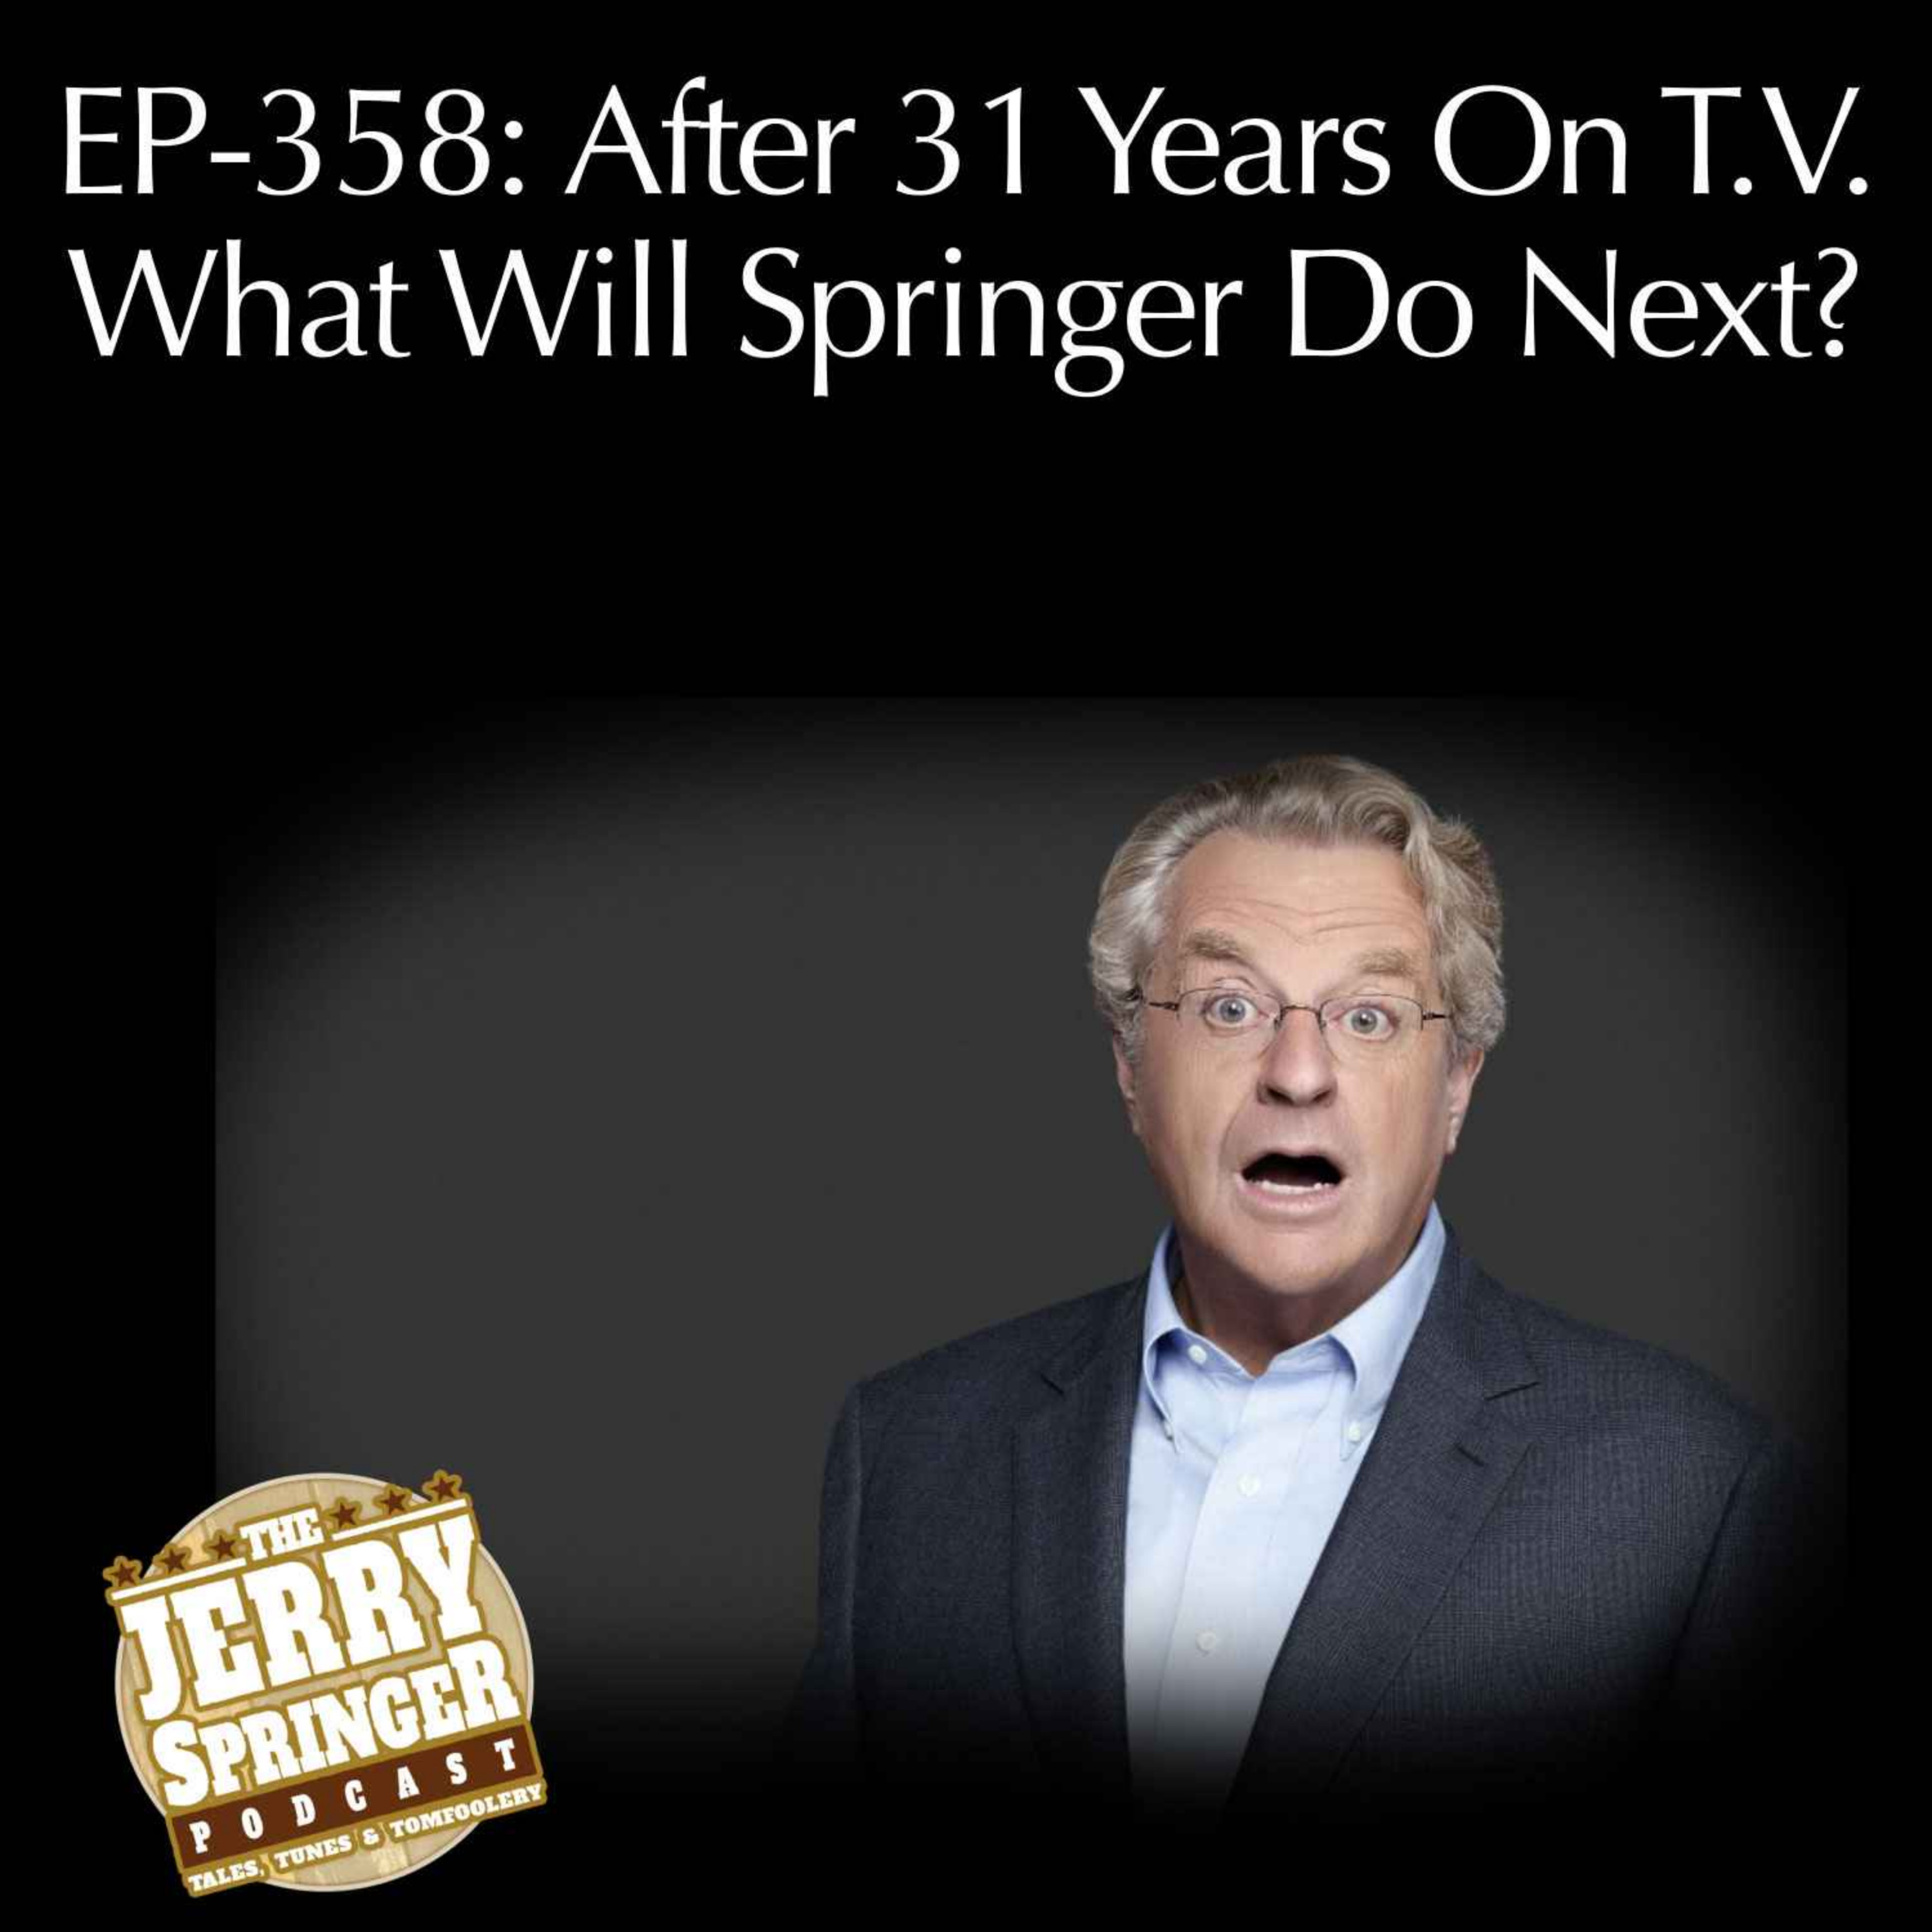 After 31 Years On T.V. What Will Springer Do Next? EP - 358